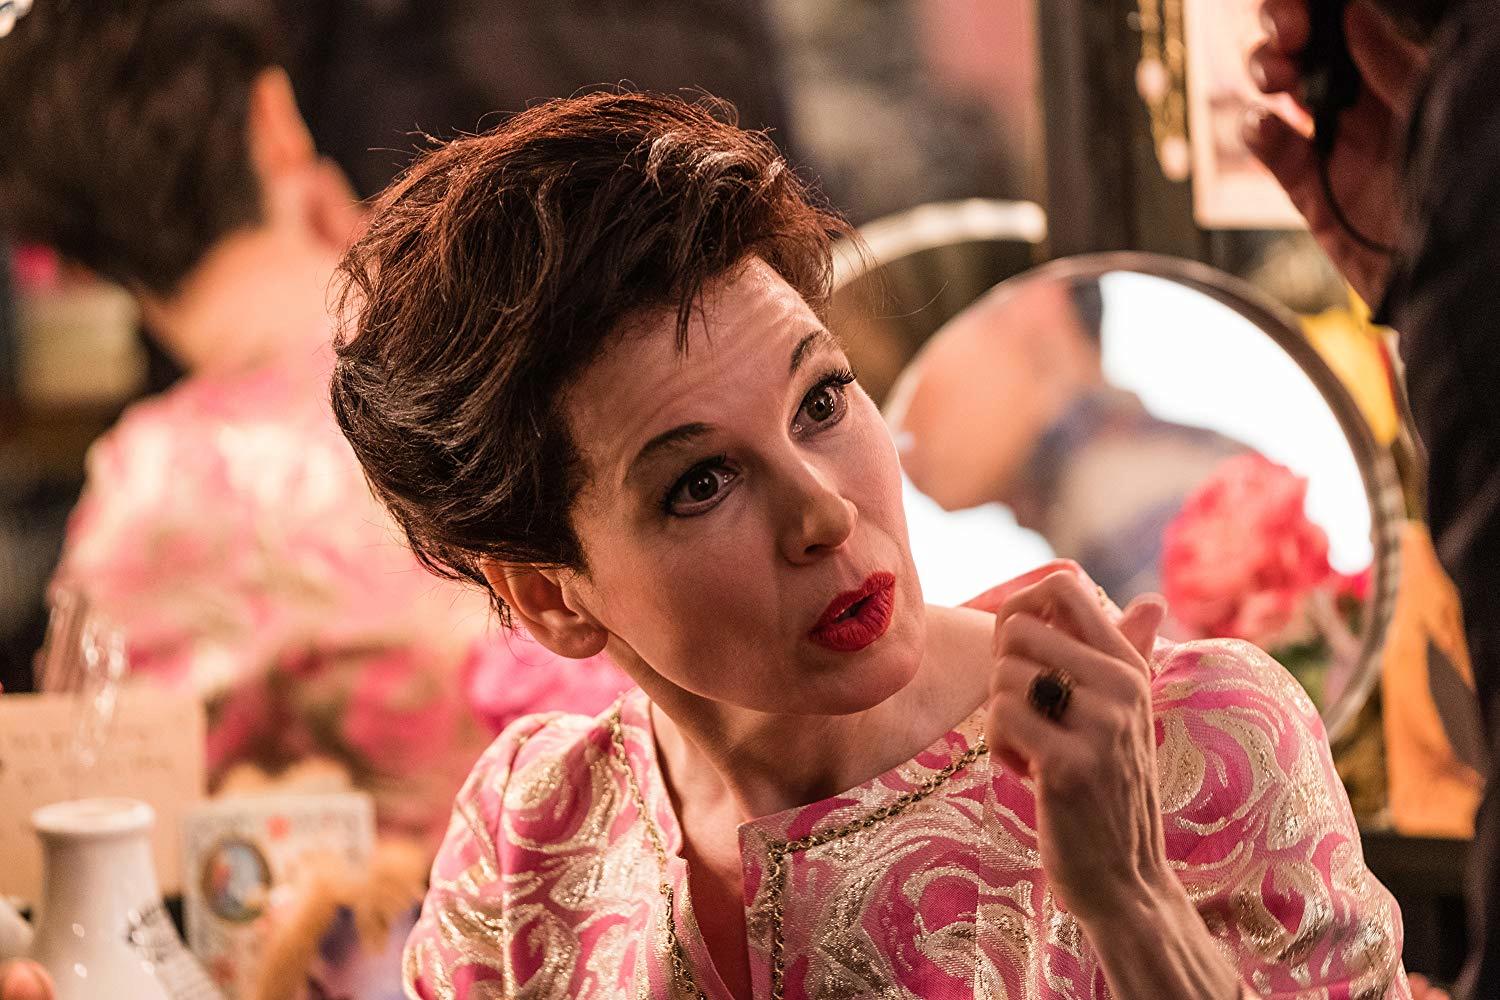 Judy: Renée Zellweger portrays a troubled but triumphant Judy Garland in this celebratory musical biopic